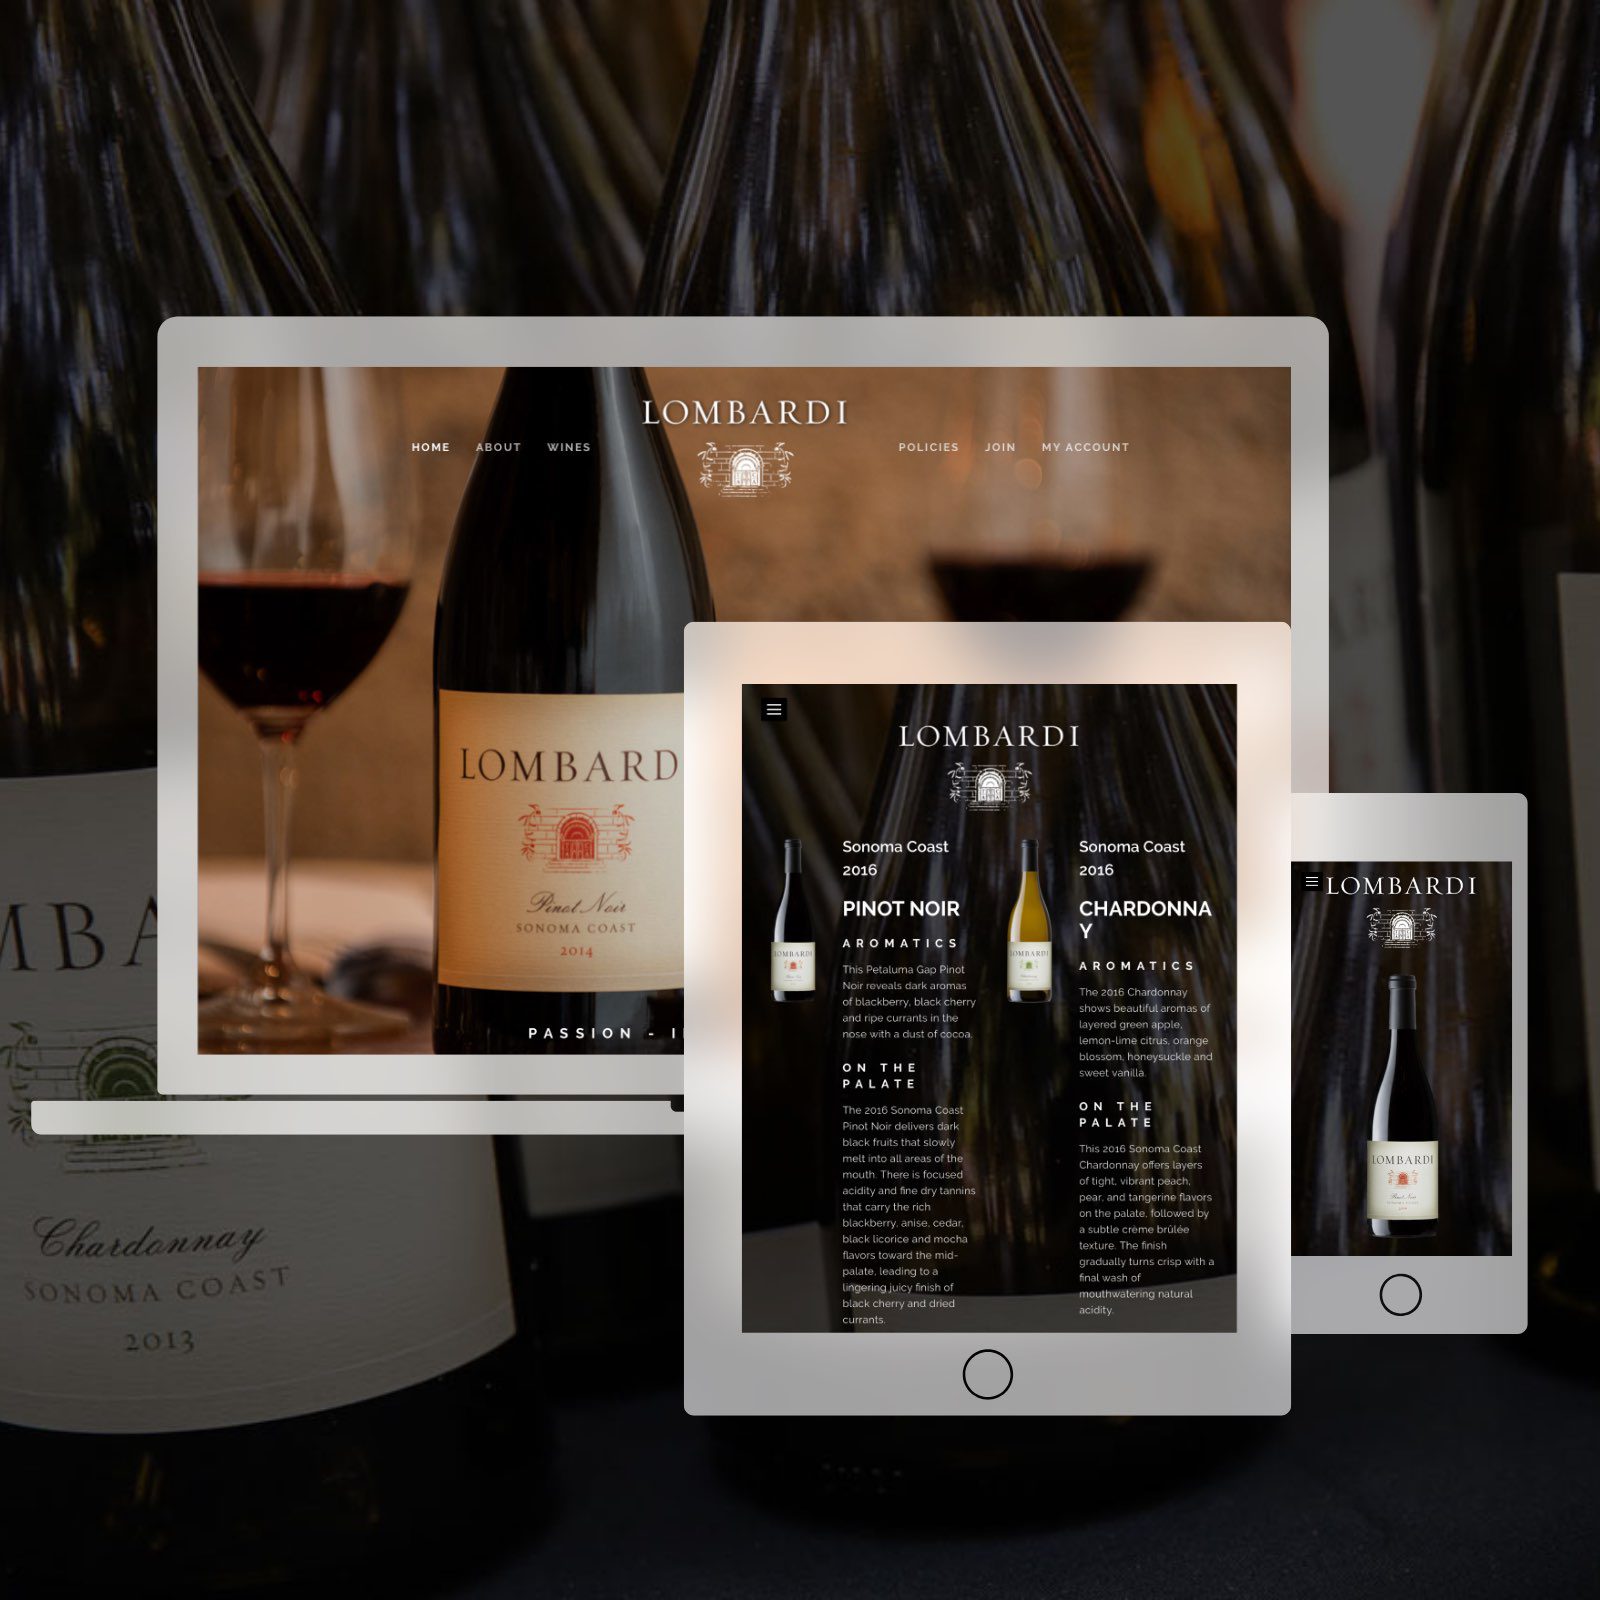 Teaser of the Lombardi Wines websites